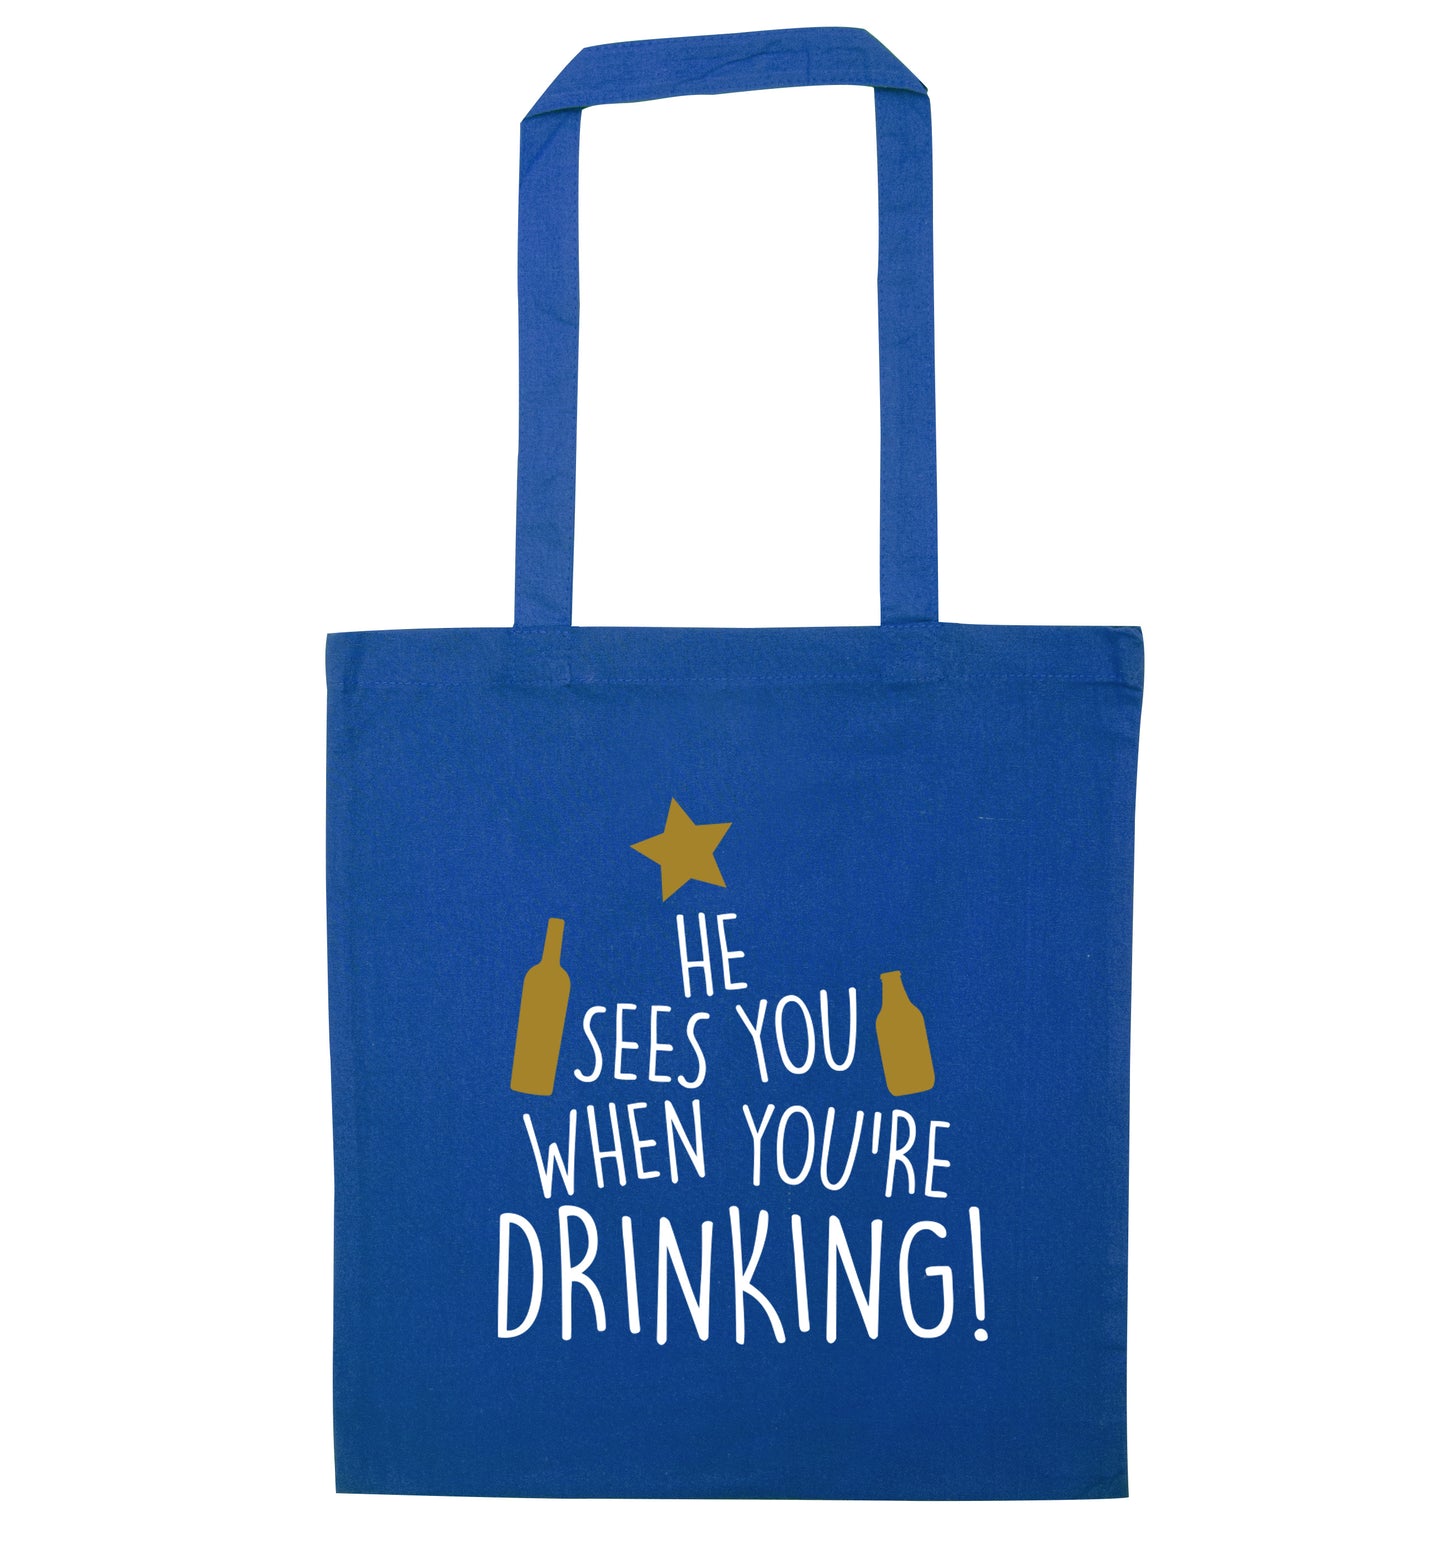 He sees you when you're drinking blue tote bag